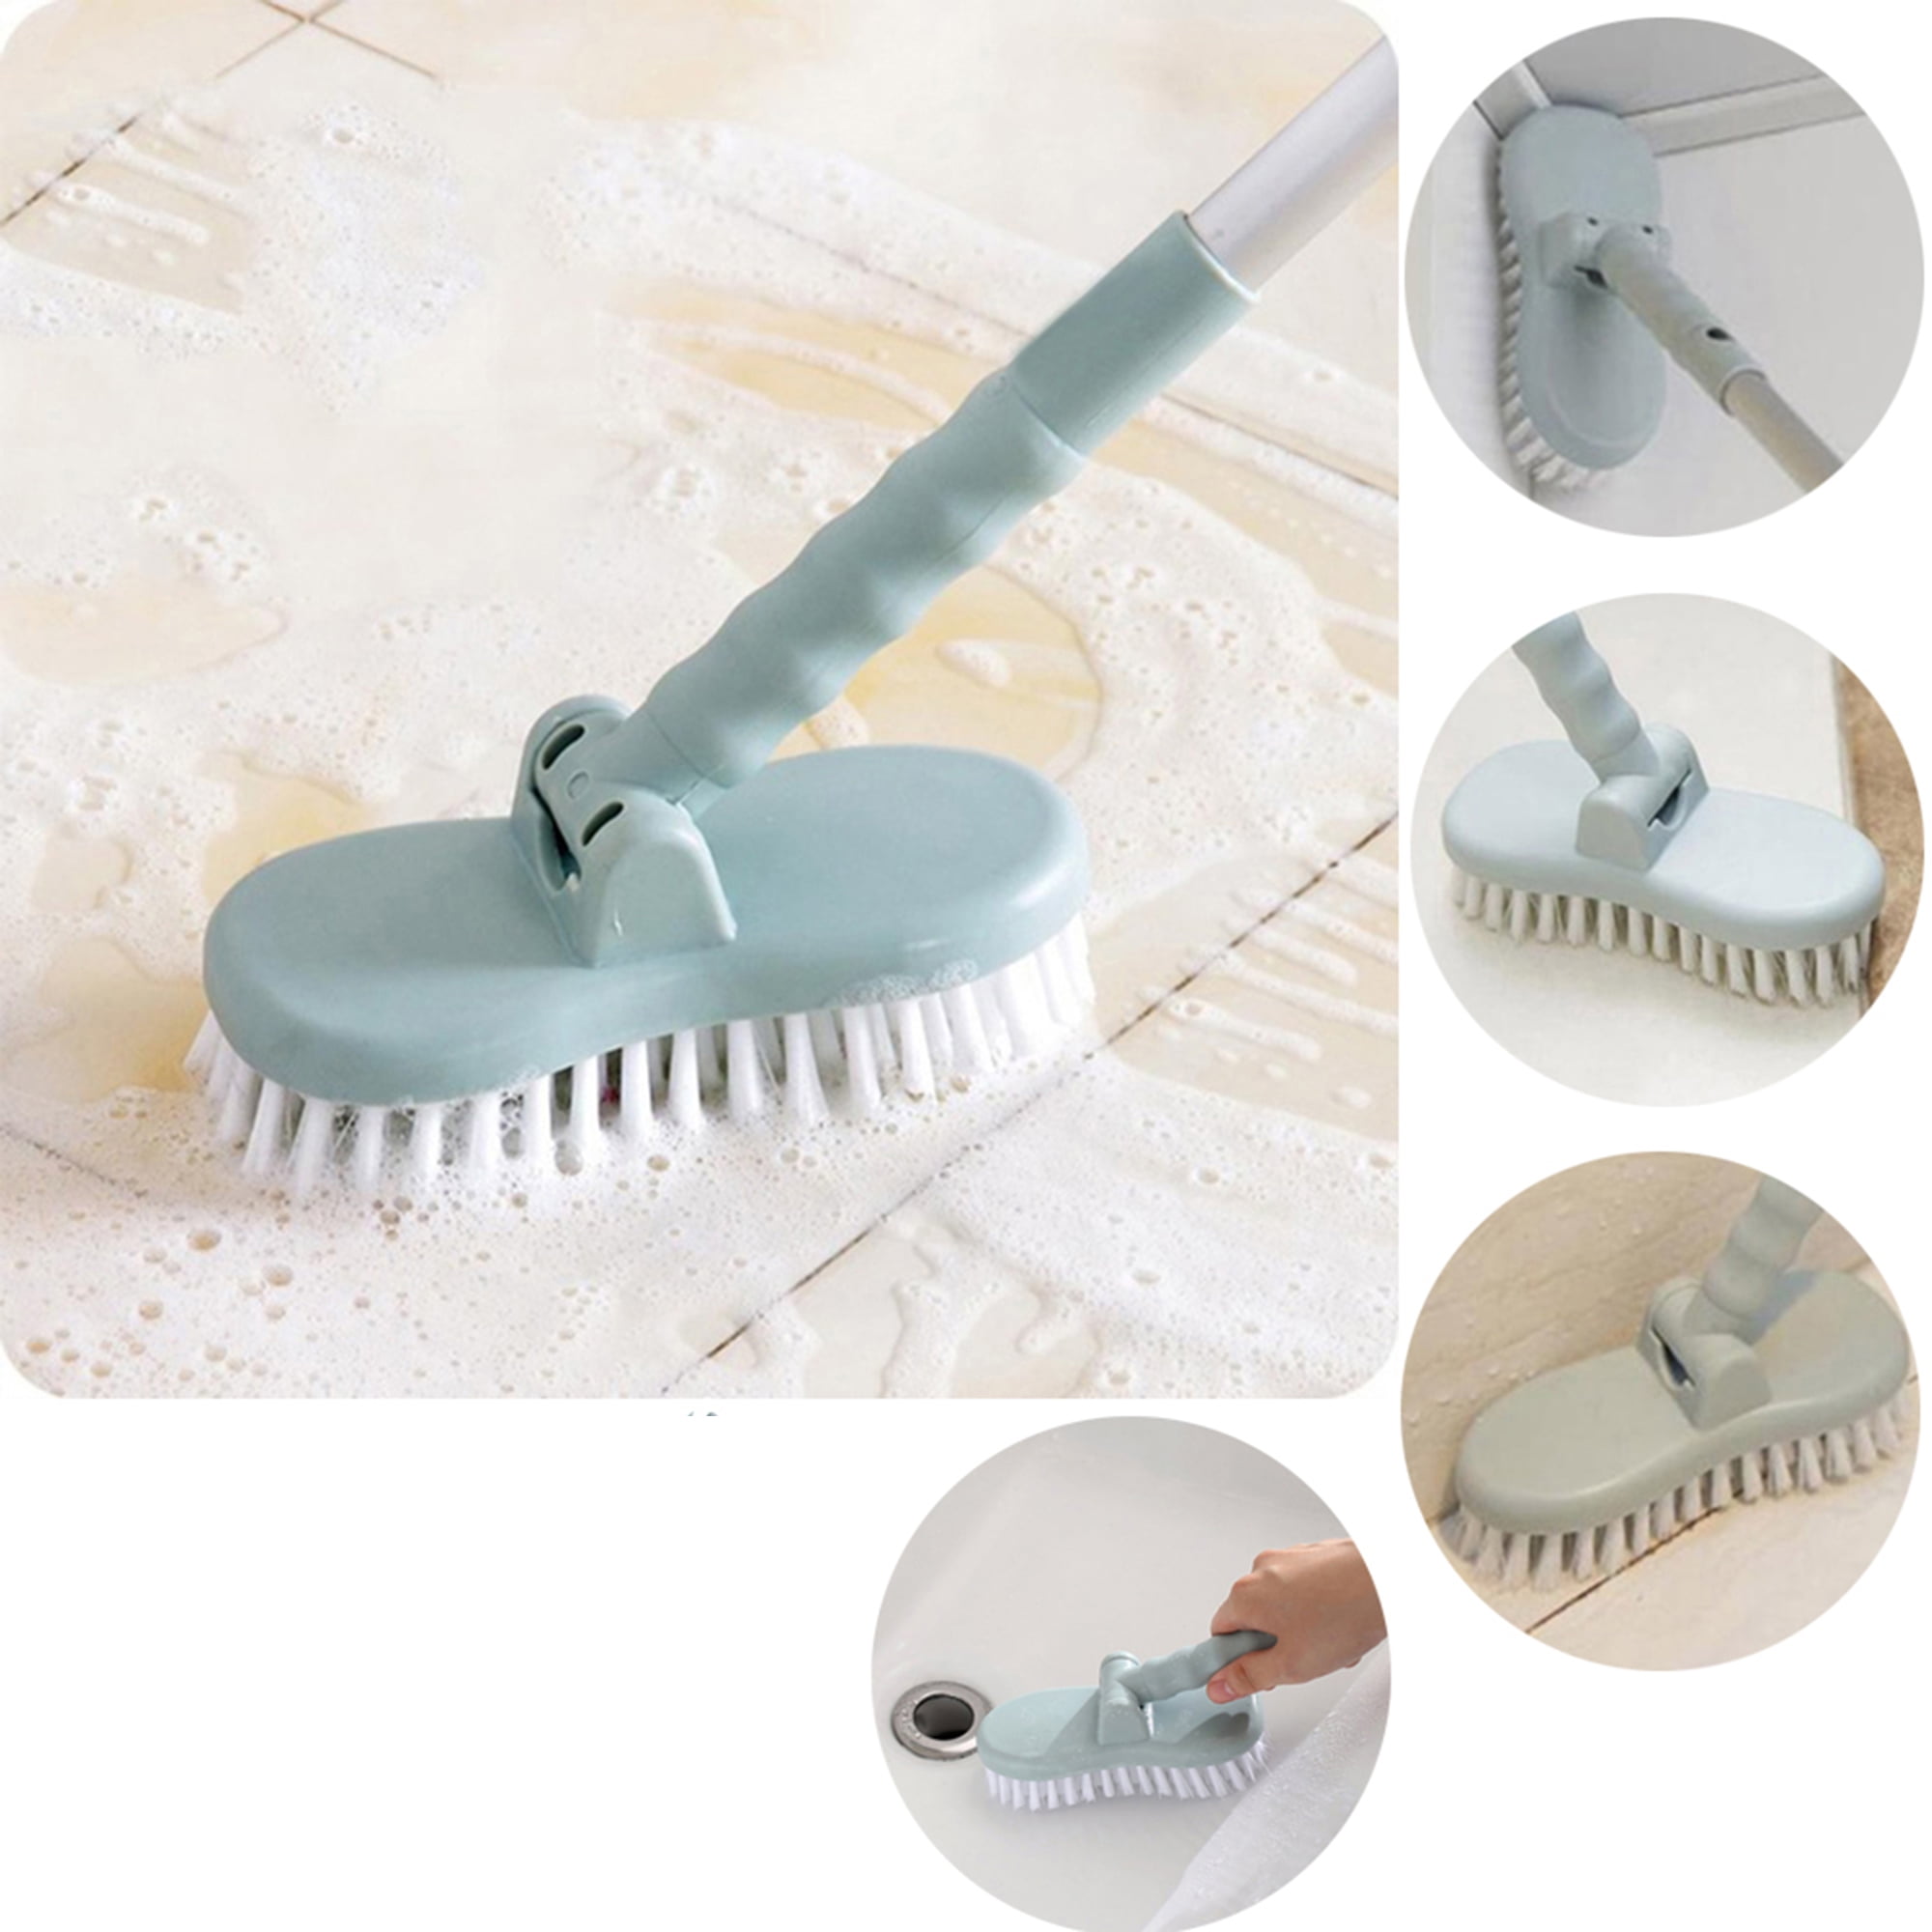 4 Pc Hand Sweeper Cleaning Brush Scrubber Brushes Bathroom Multi